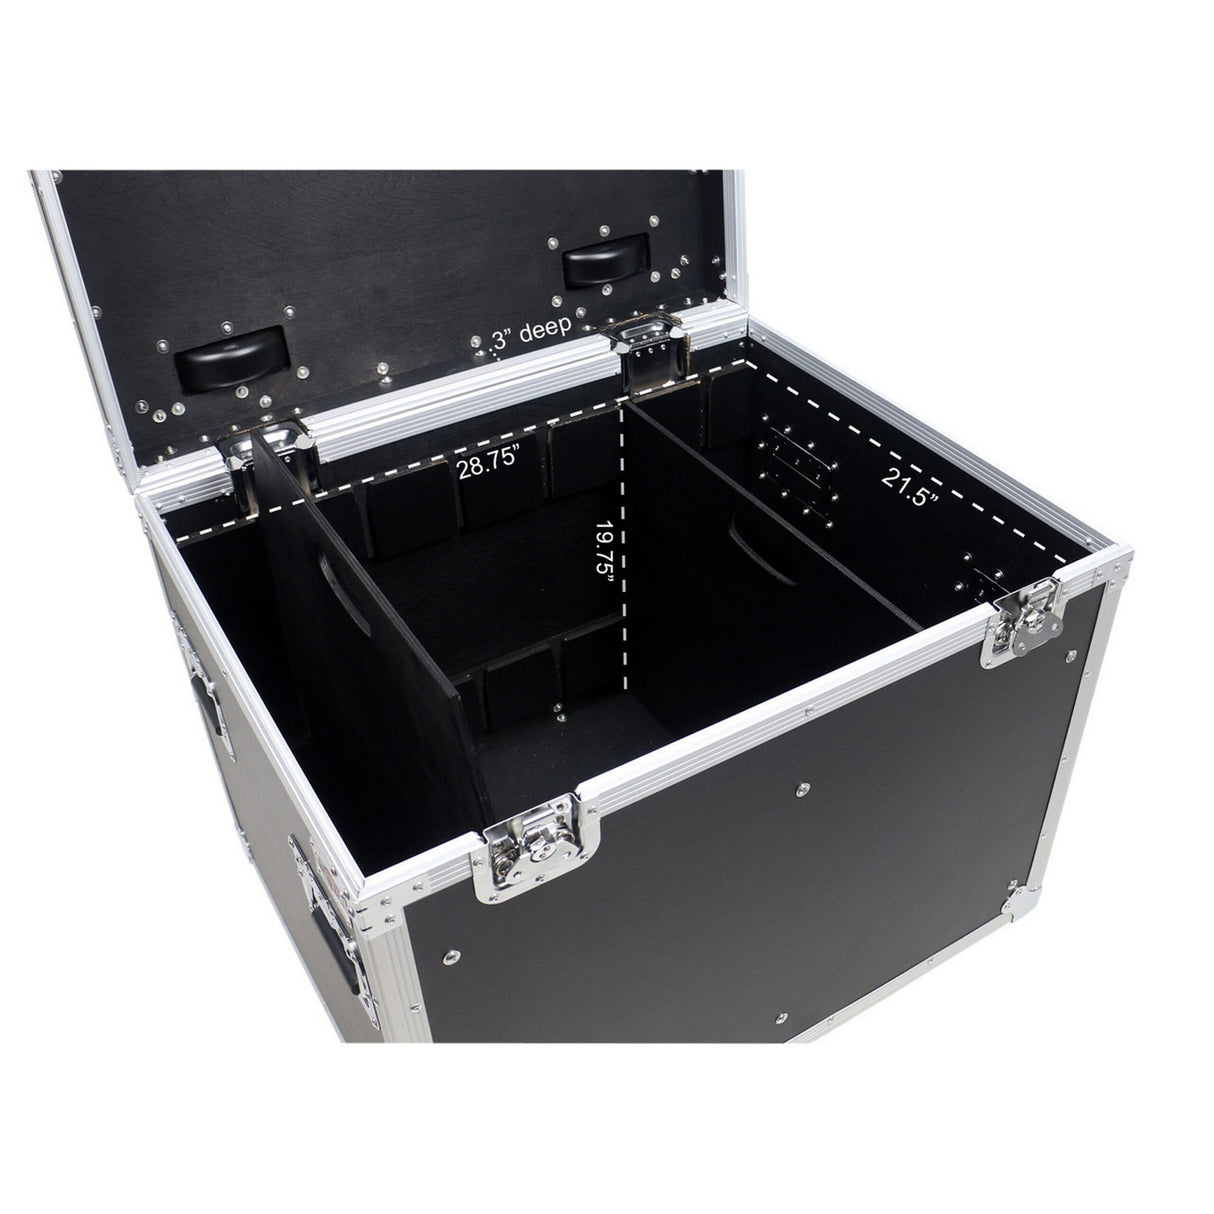 OSP TC3024-30 30 Inch Transport Case with Dividers and Tray